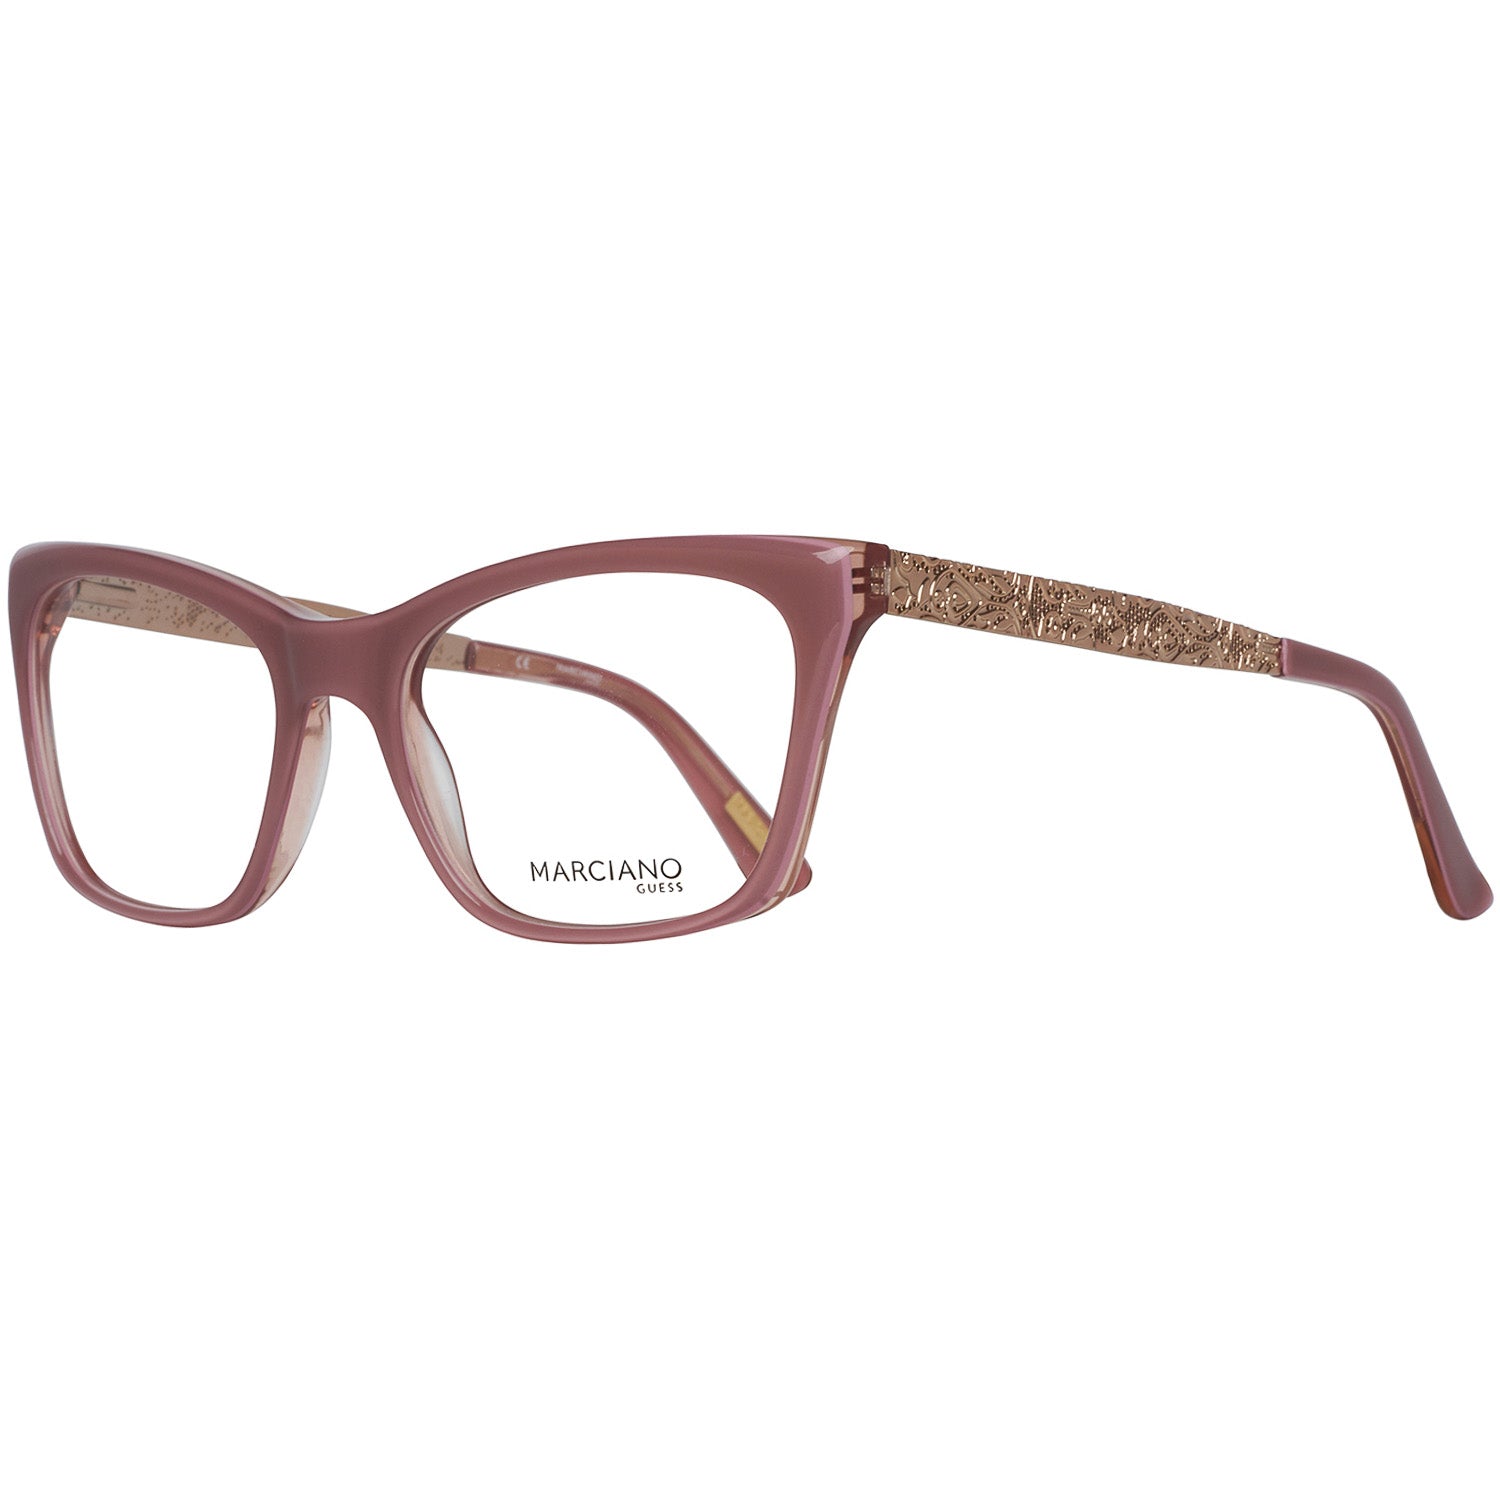 Marciano by Guess Frames Marciano by Guess Glasses Frames GM0267 072 53 Eyeglasses Eyewear UK USA Australia 